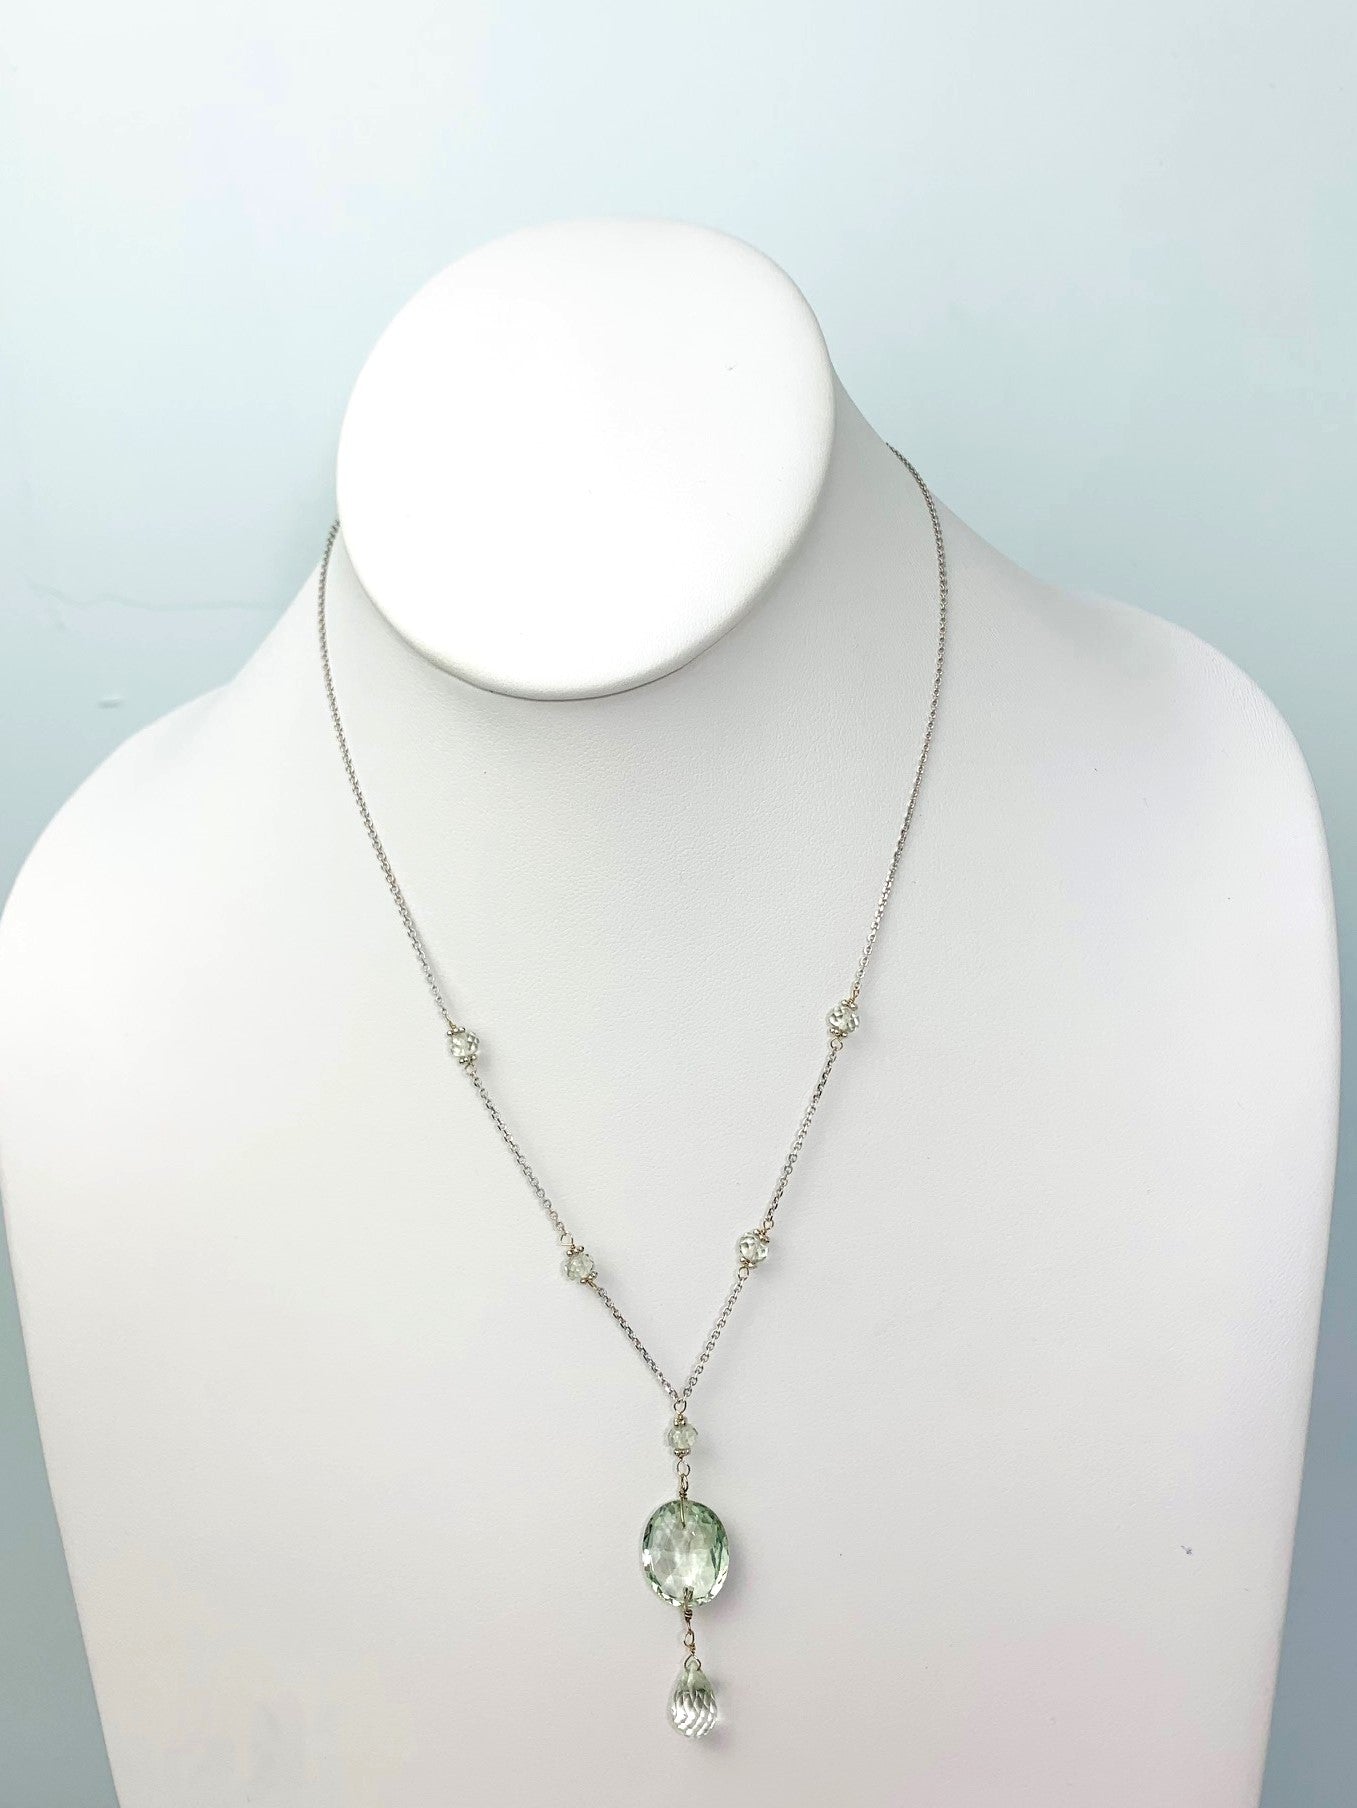 17" Prasiolite (Green Quartz) Station Necklace With Oval Checkerboard And Briolette Lariat Drop in 14KW - NCK-359-TNCDRPGM14W-GQ-17